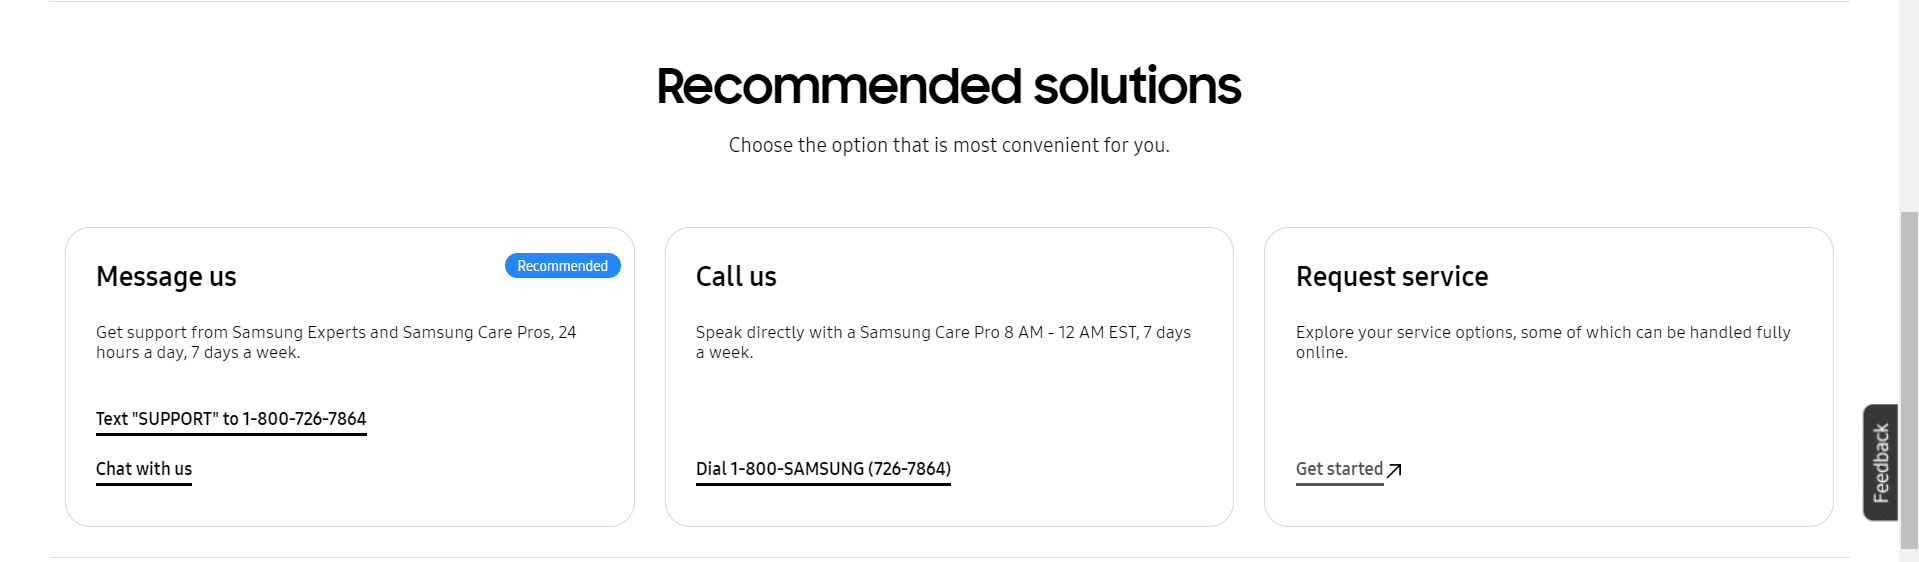 samsung tv customer support group webpage 